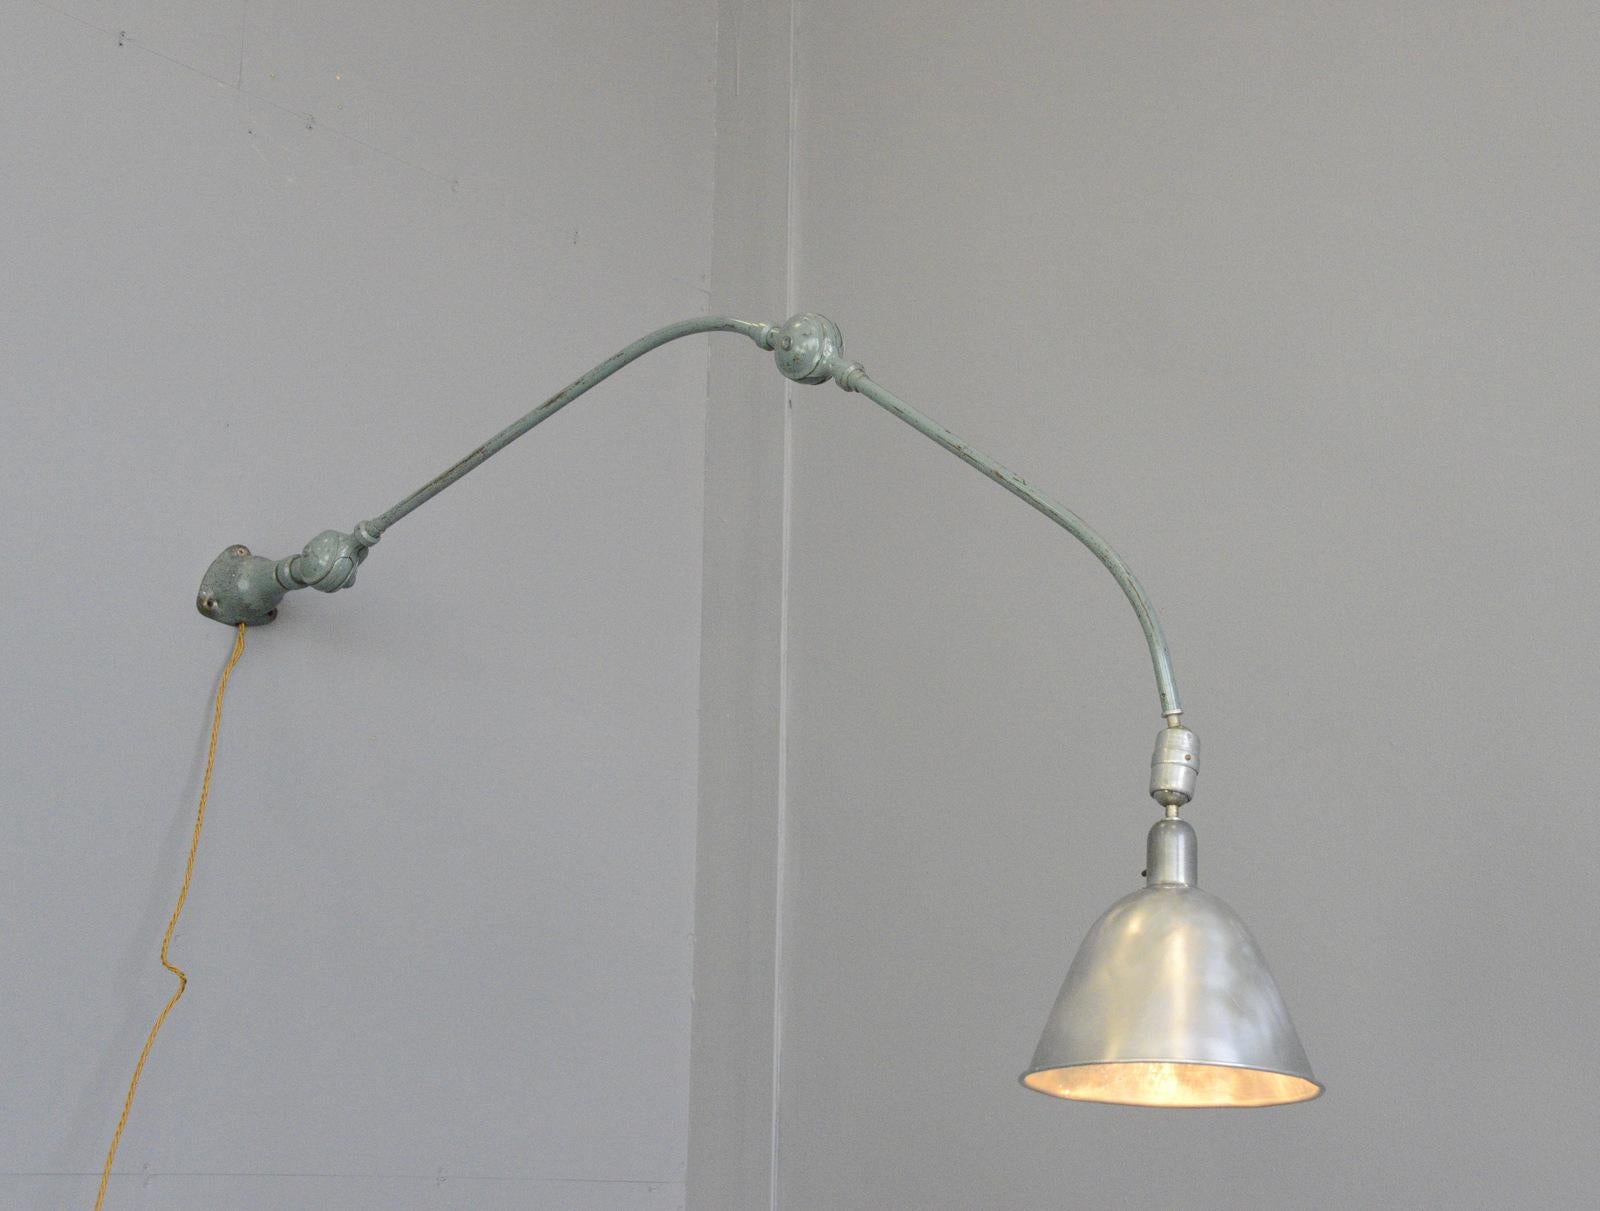 Wall lamp by Johan Petter Johansson for triplex

- Articulated tubular steel arms and joints
- Aluminium shade
- Original on/off switch on the shade
- Turns 180 from the wall
- Takes E27 fitting bulbs
- Designed by Johan Petter Johansson
-